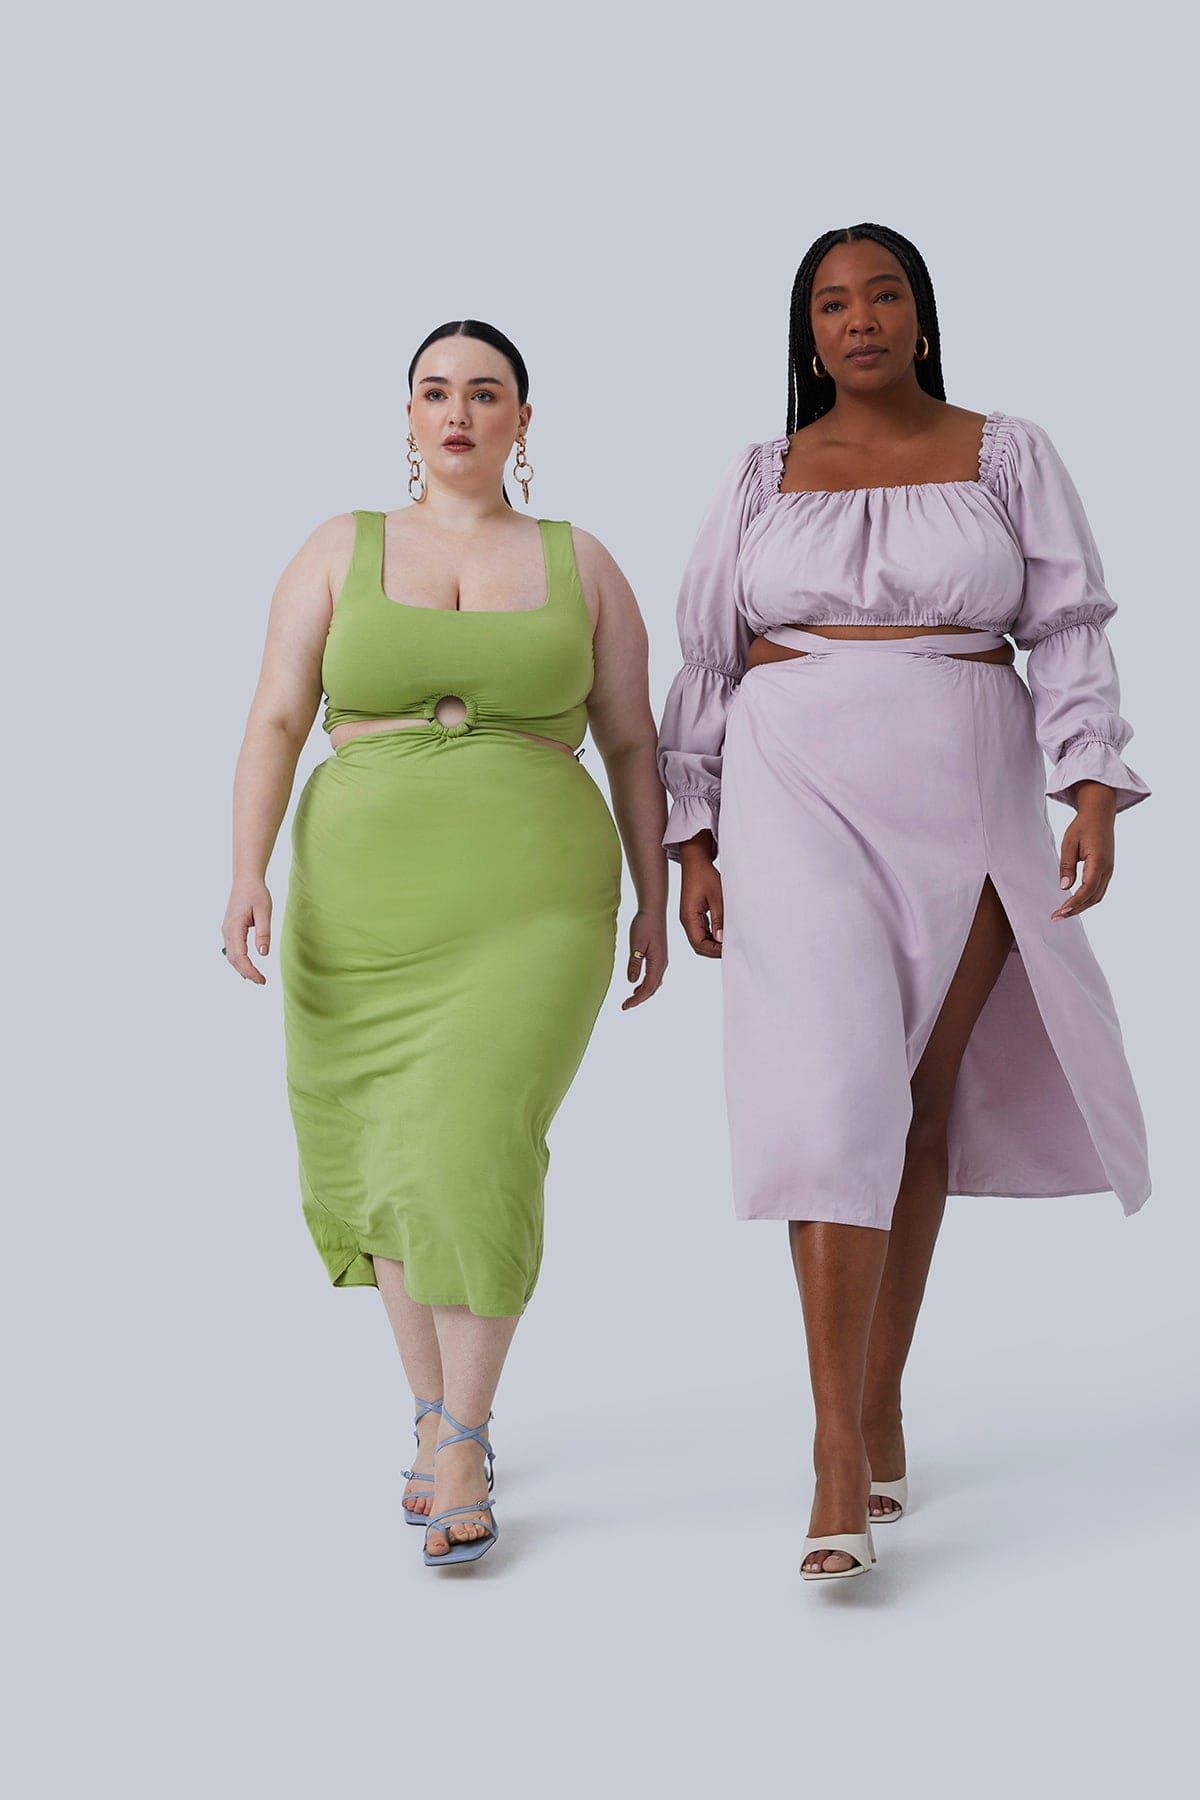 Two Plus Size Models walking towards the camera. Model on the left is wearing Gigi Midi in Pistachio size 2X, model on the right is wearing the Gia Top and Gia Skirt in Lilac size 2X. All designed by Gia IRL Plus Size Boutique.